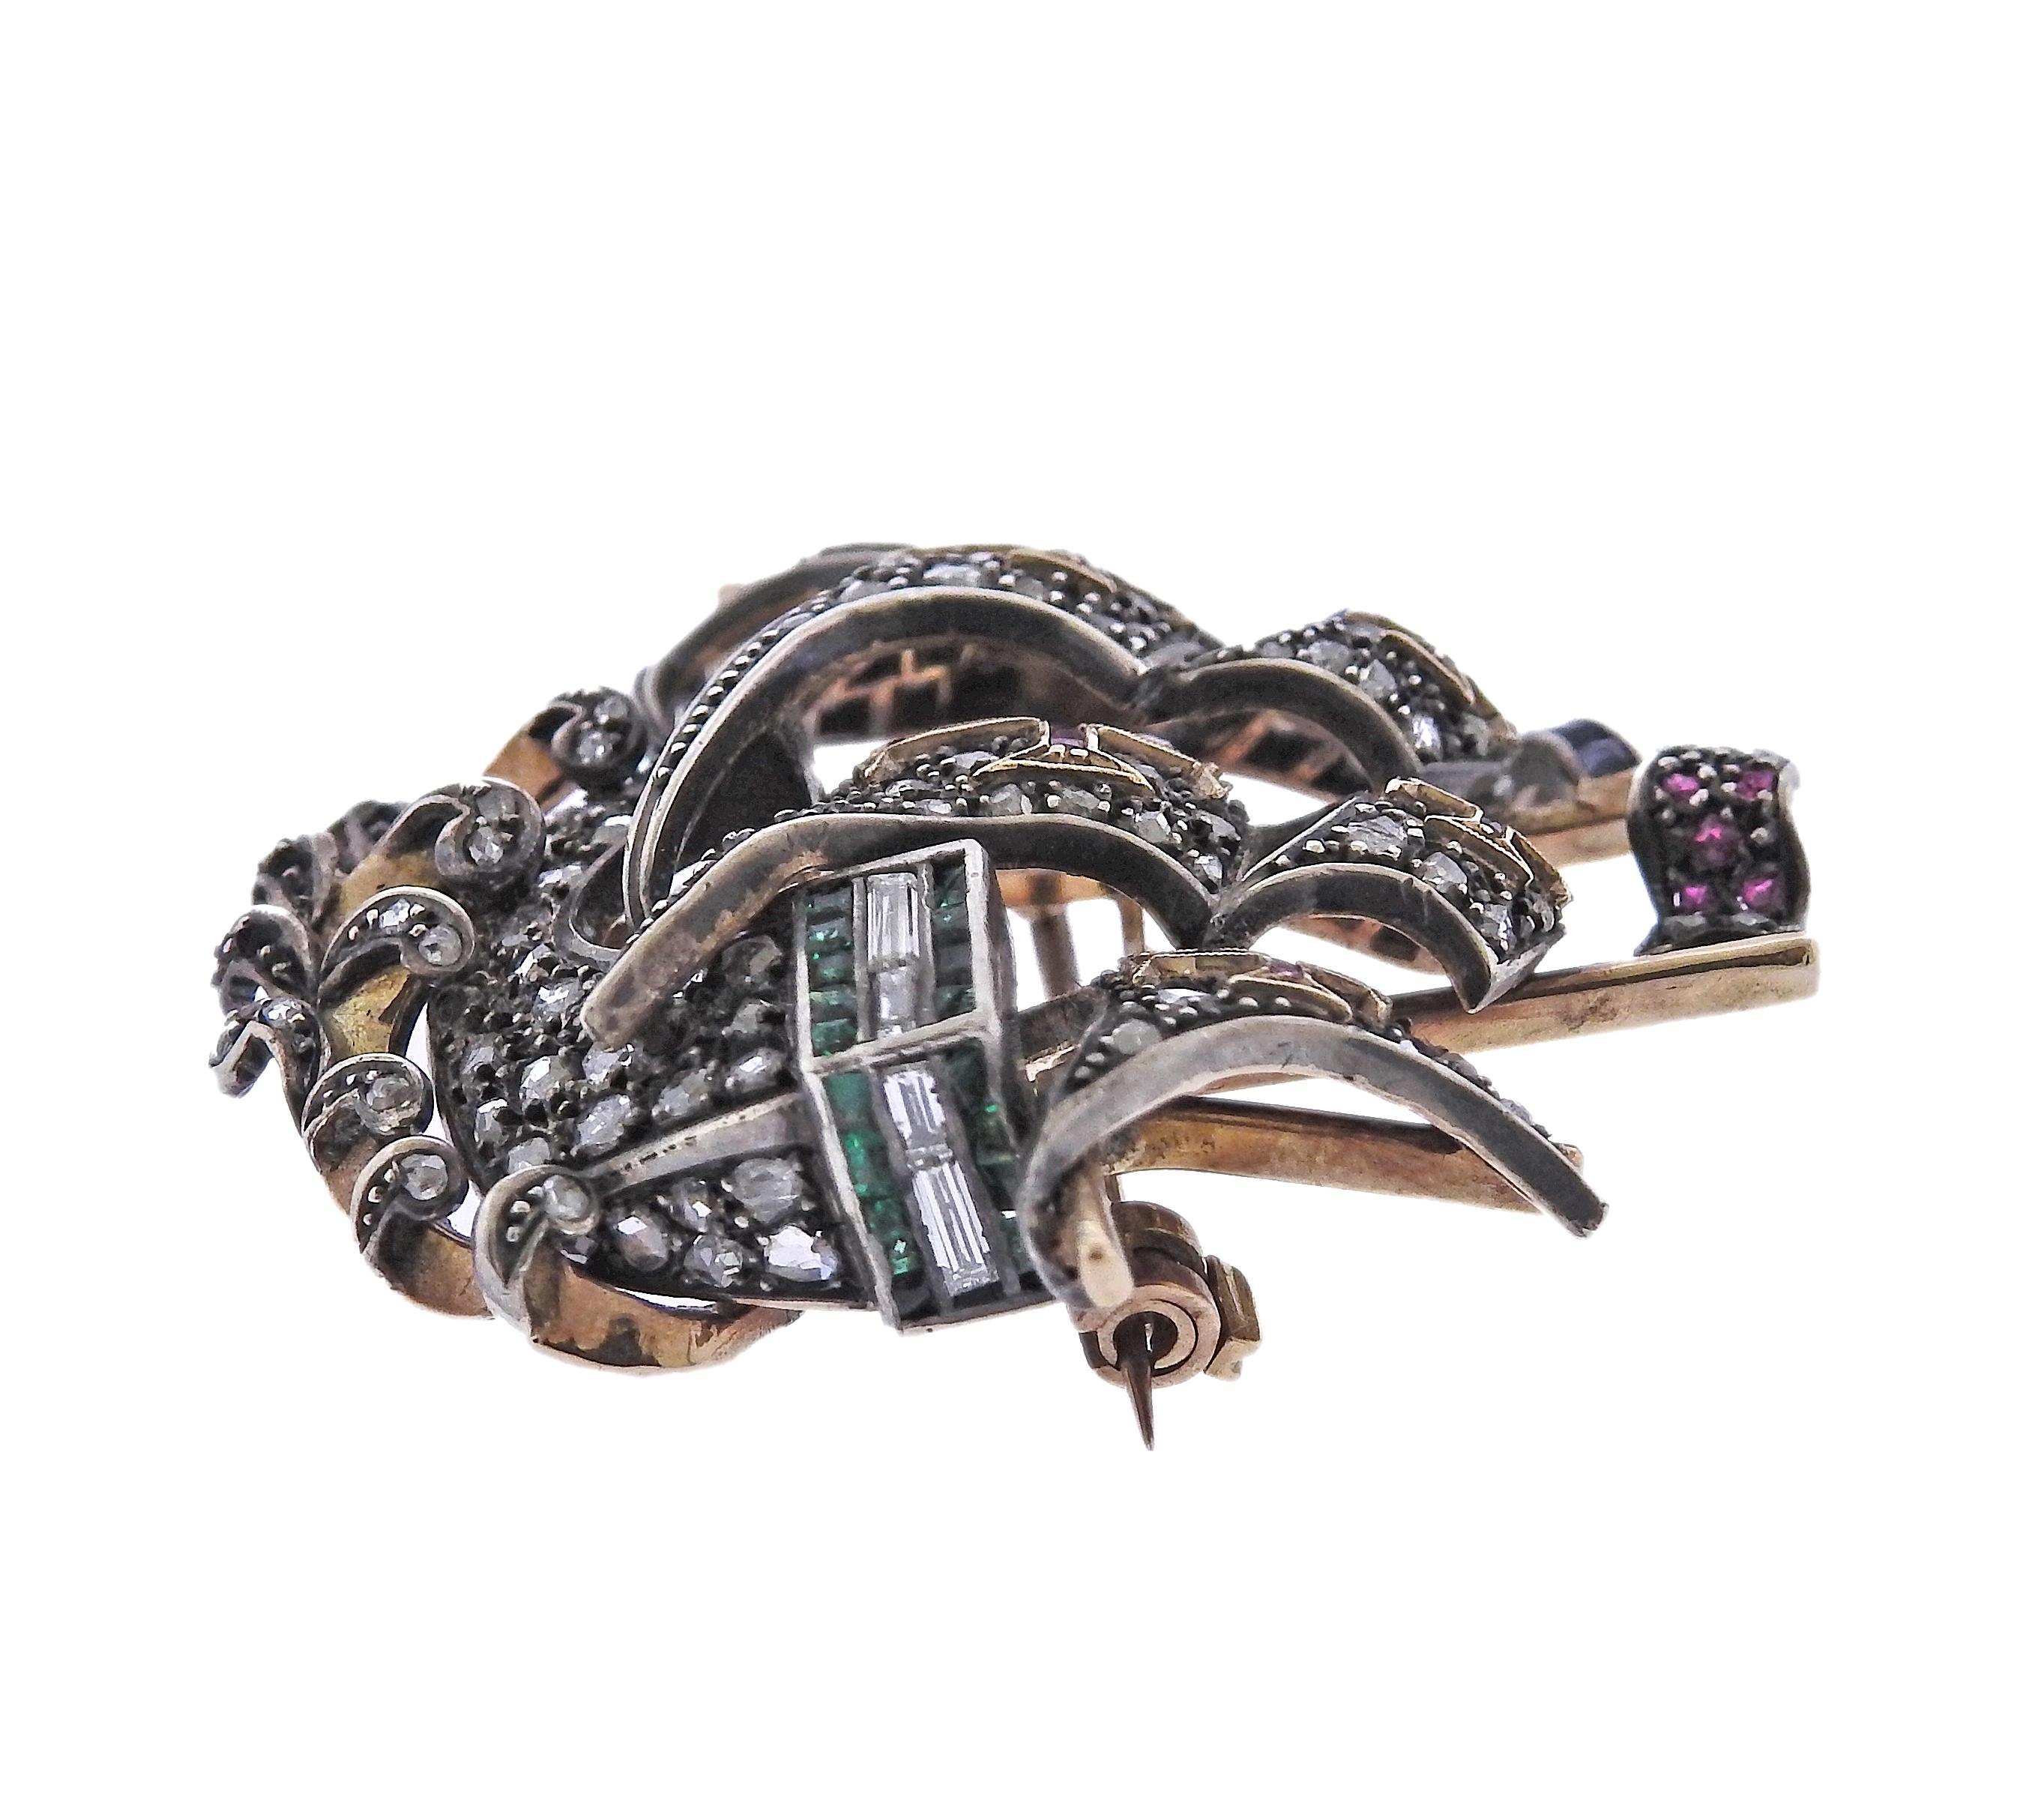 Antique 14k gold and silver top ship brooch, decorated with rose cut diamonds, rubies, sapphires and sapphires (multiple stones are missing/chipped). Brooch is 40mm x 39mm. Weight - 17 grams.